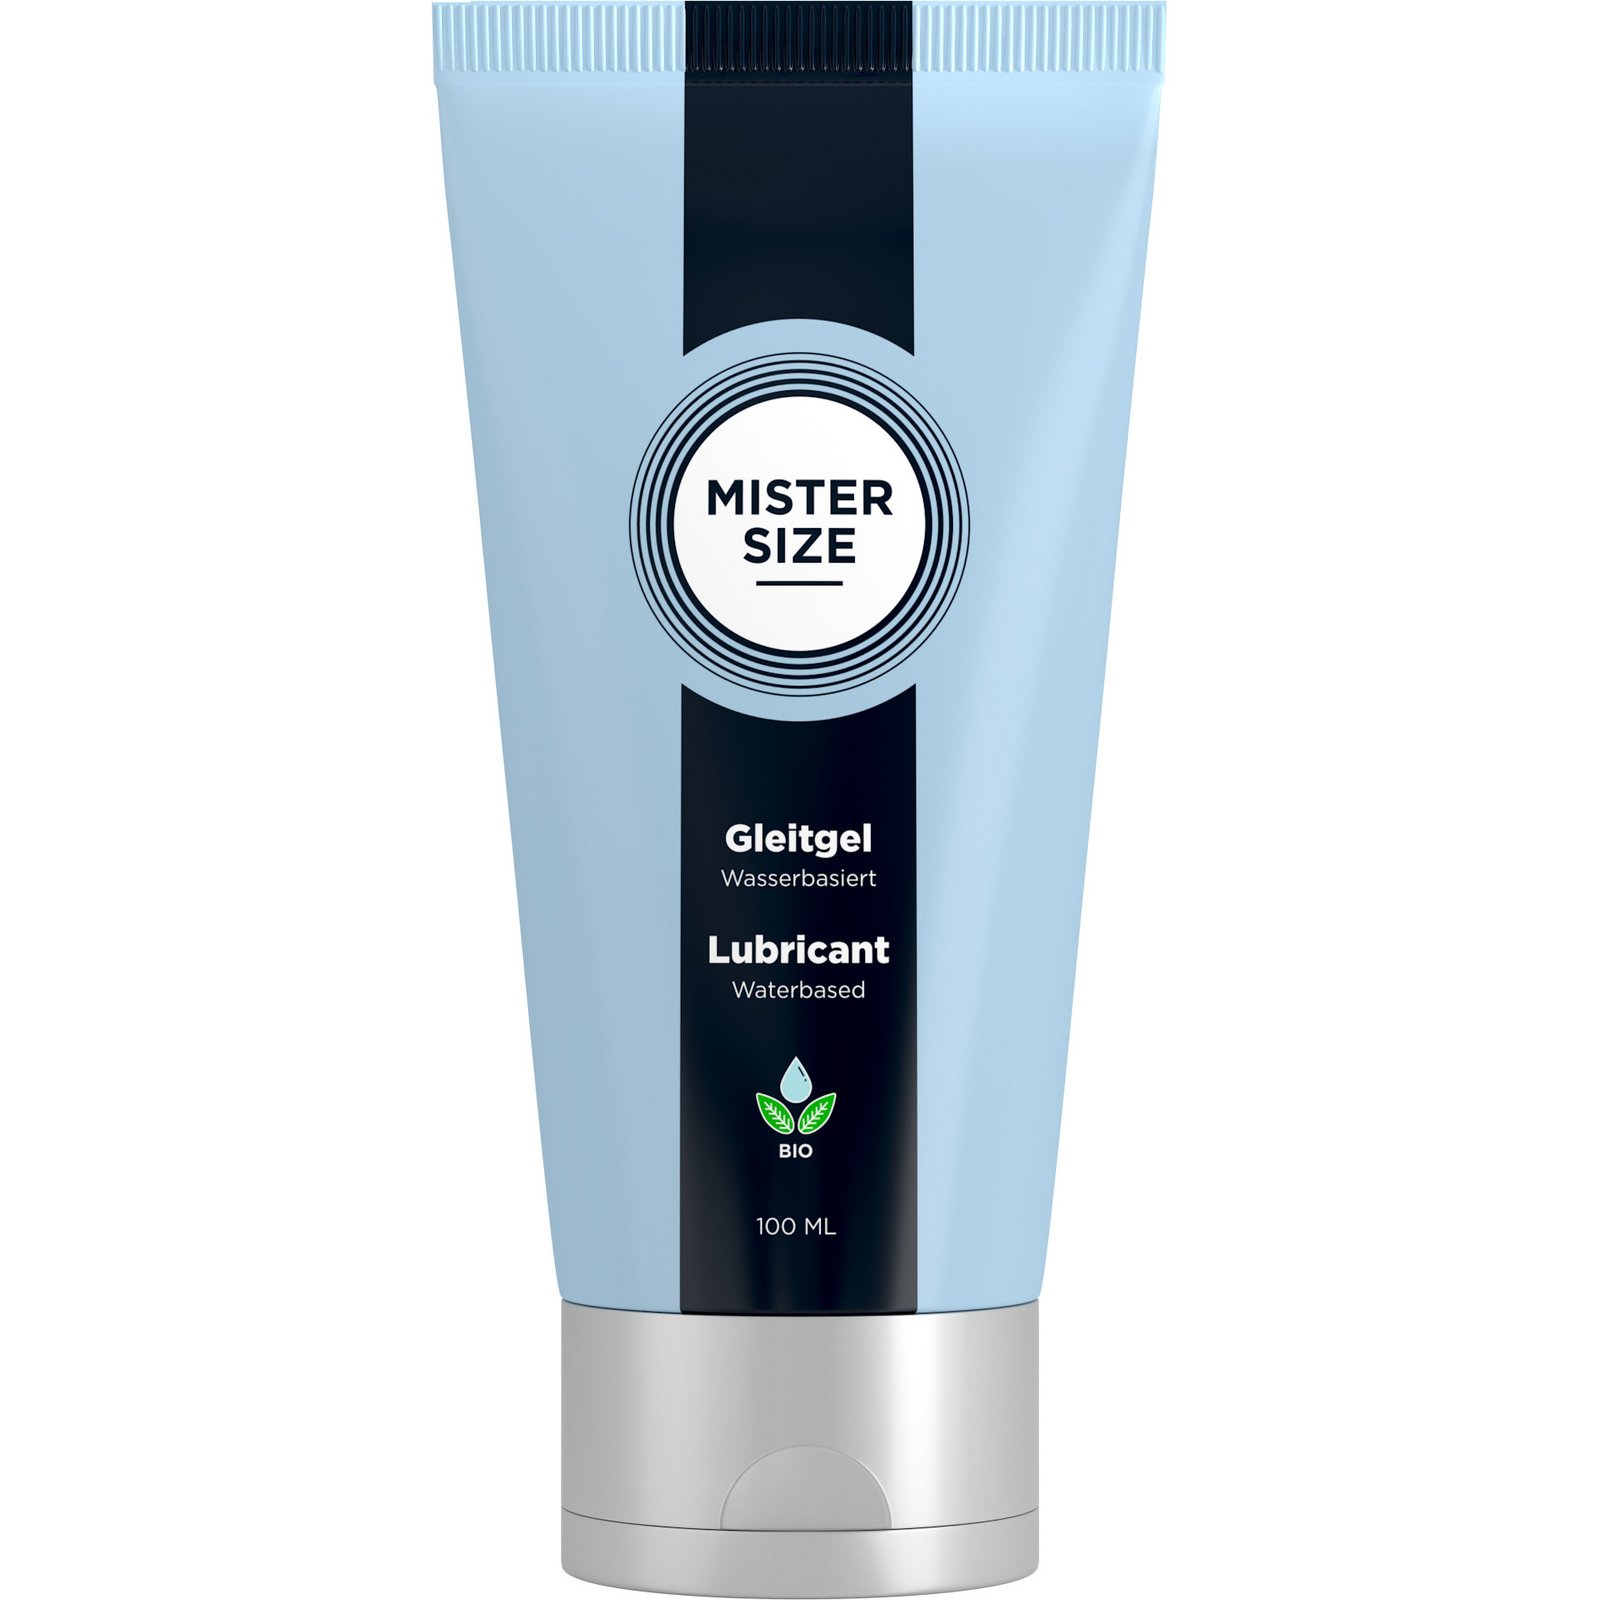 MISTER SIZE organic lubricant gel in 100 ml tube